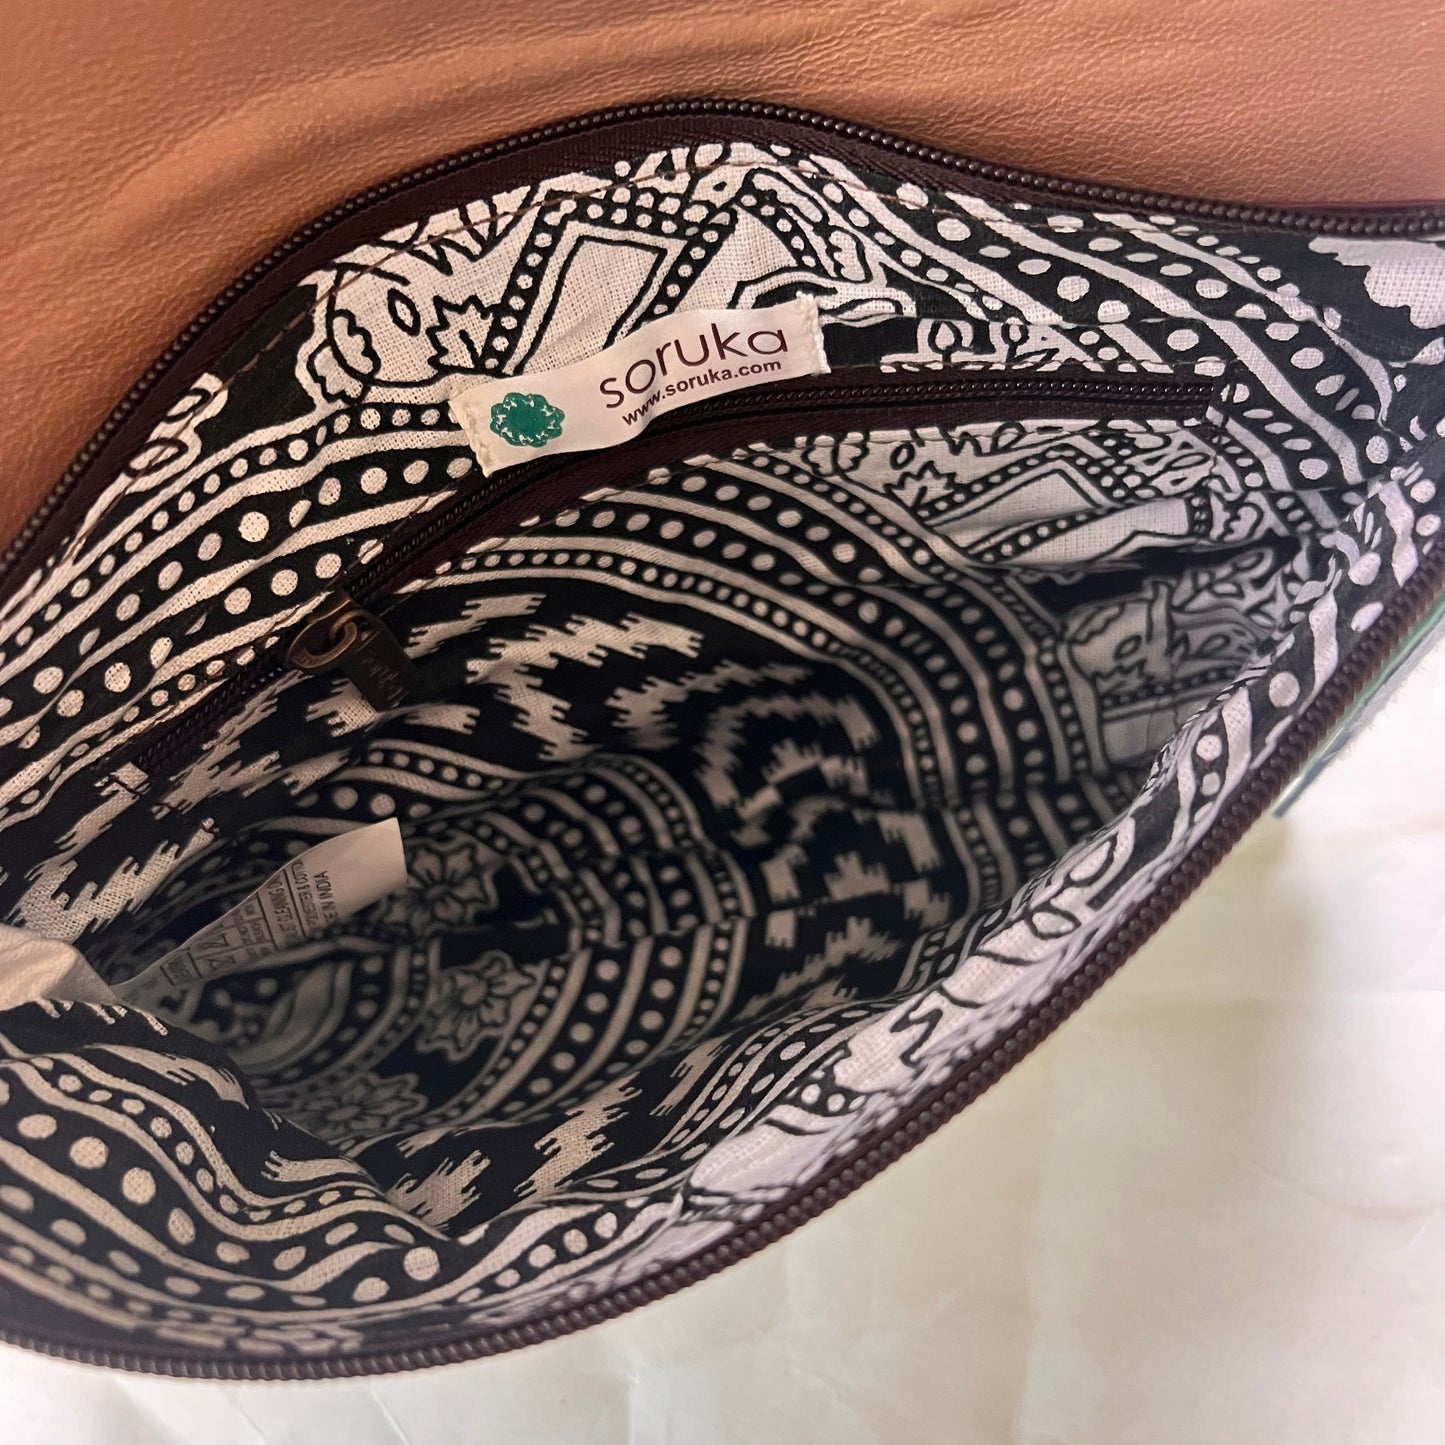 interior view of saddle bag showing inner zip pocket and patterned lining.